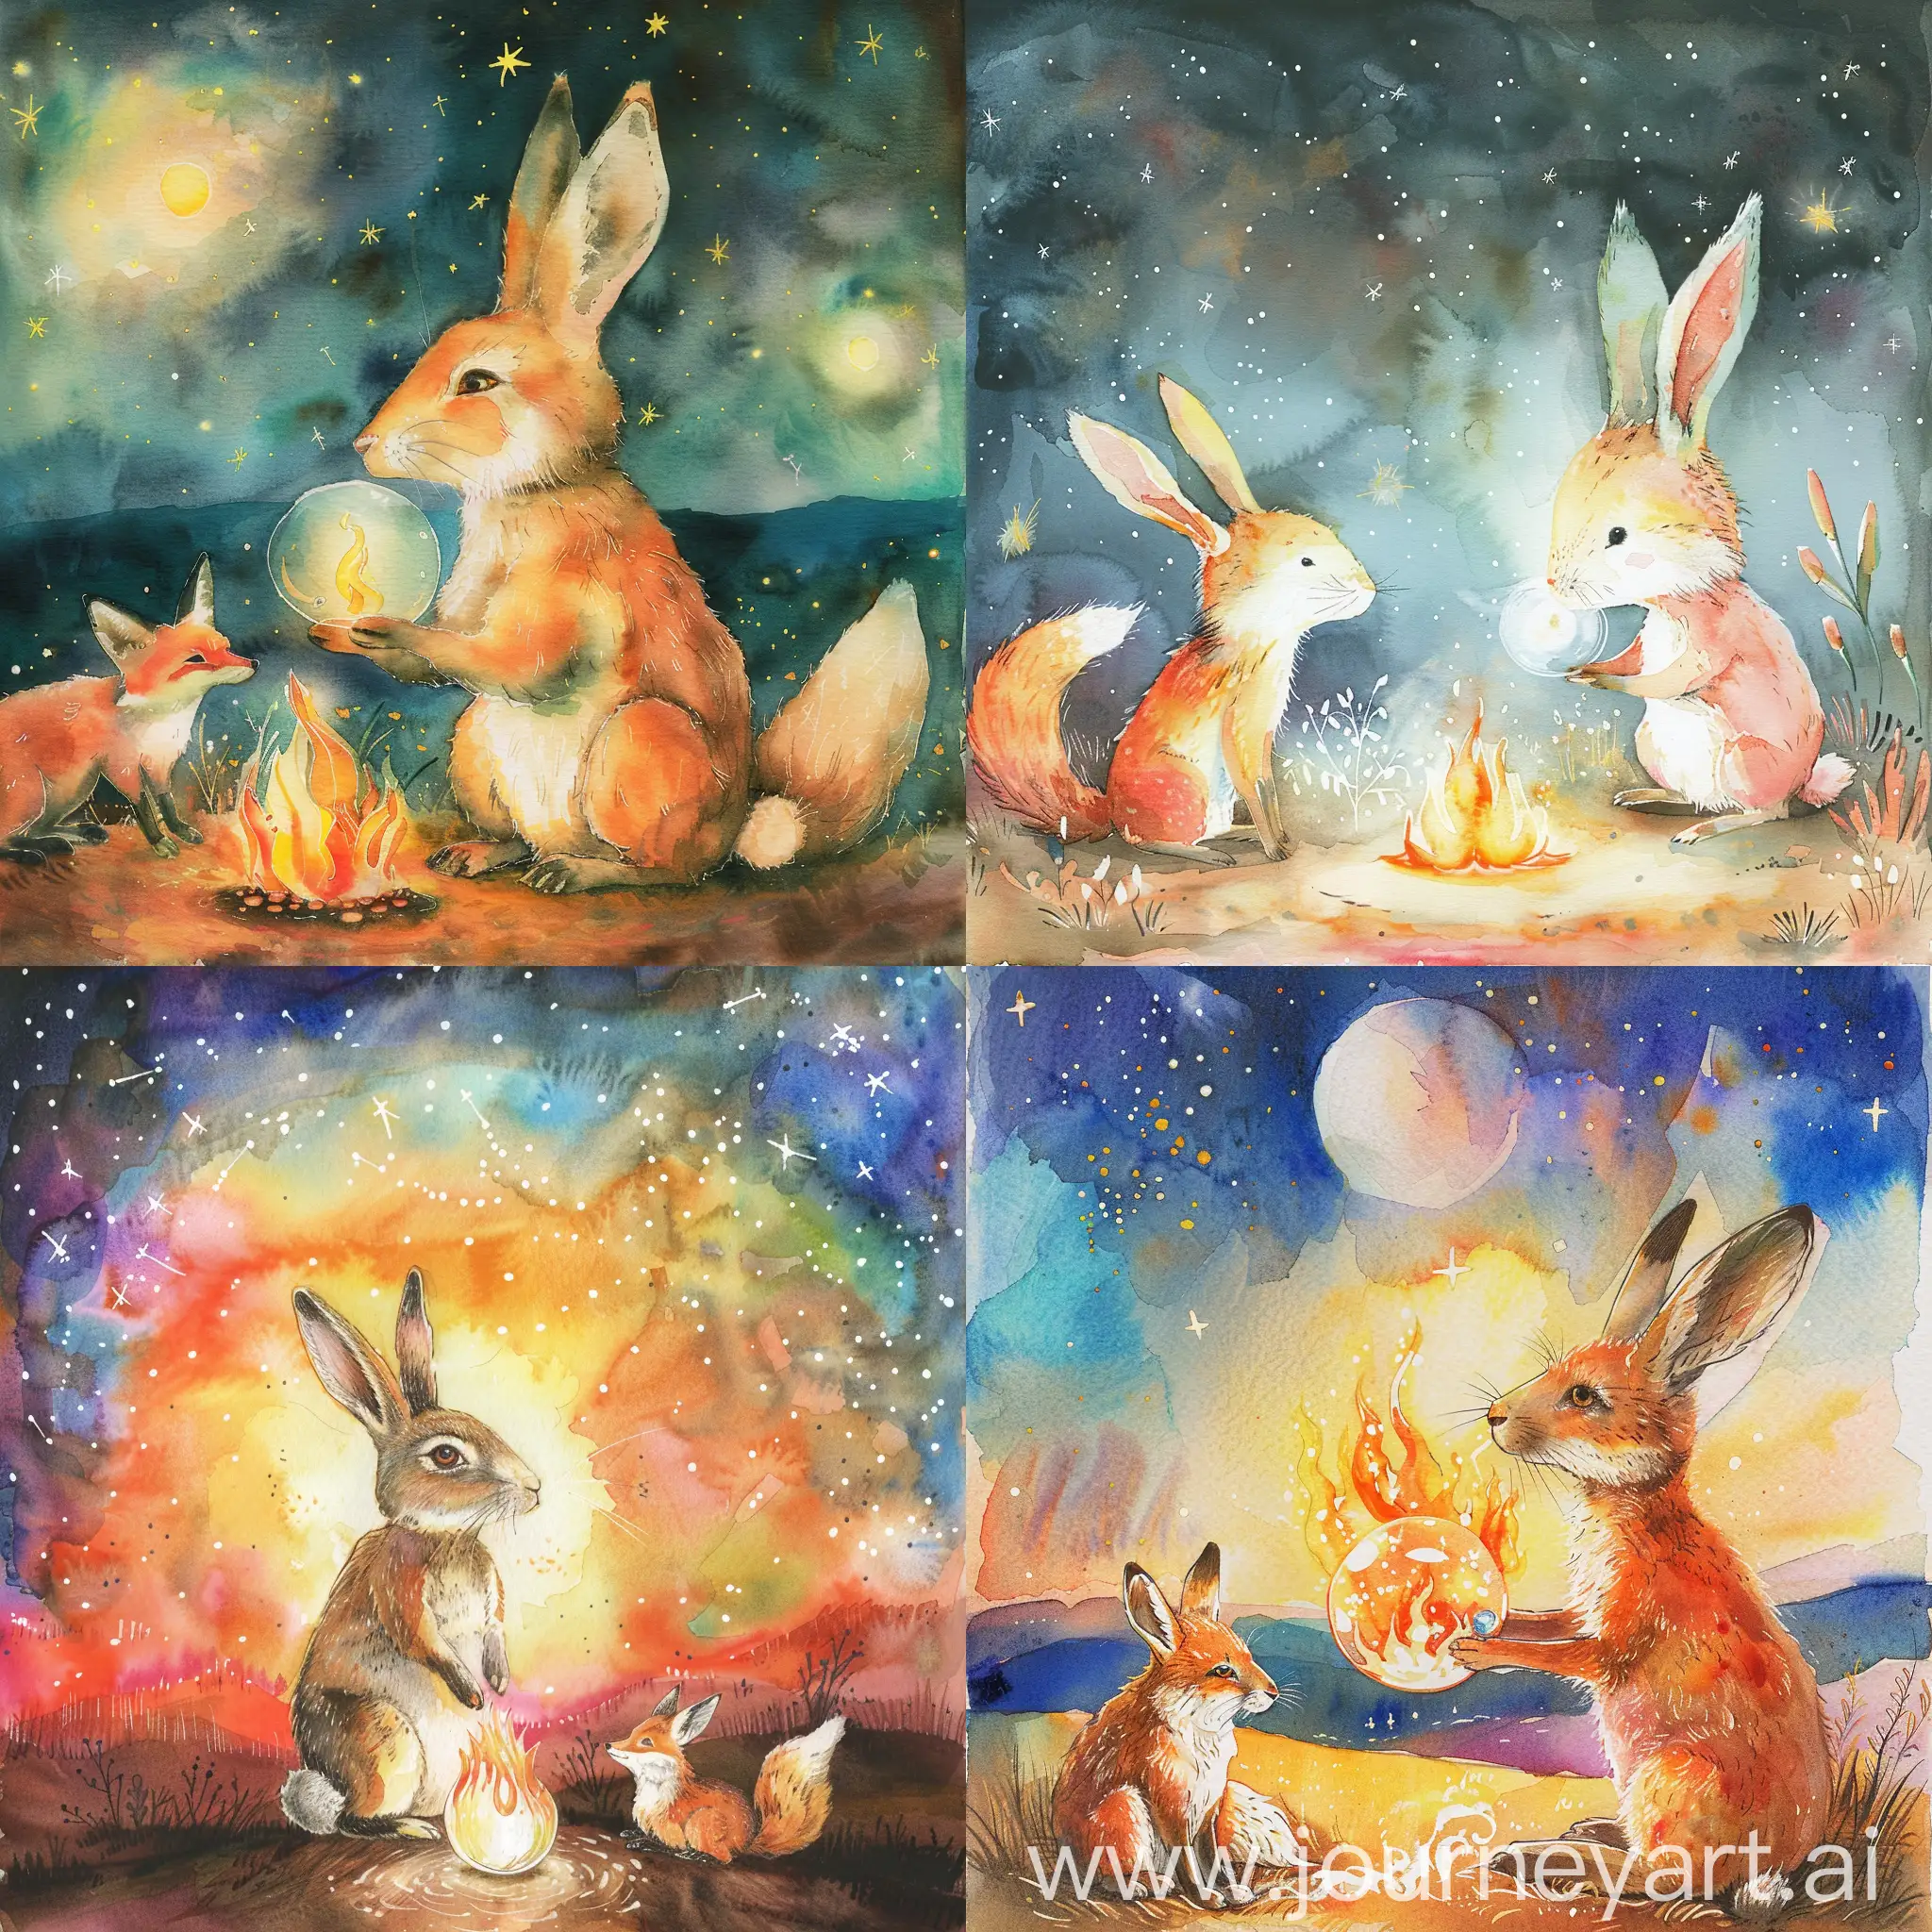 Starry-Night-Rabbit-and-Fox-Gaze-at-Flaming-Orb